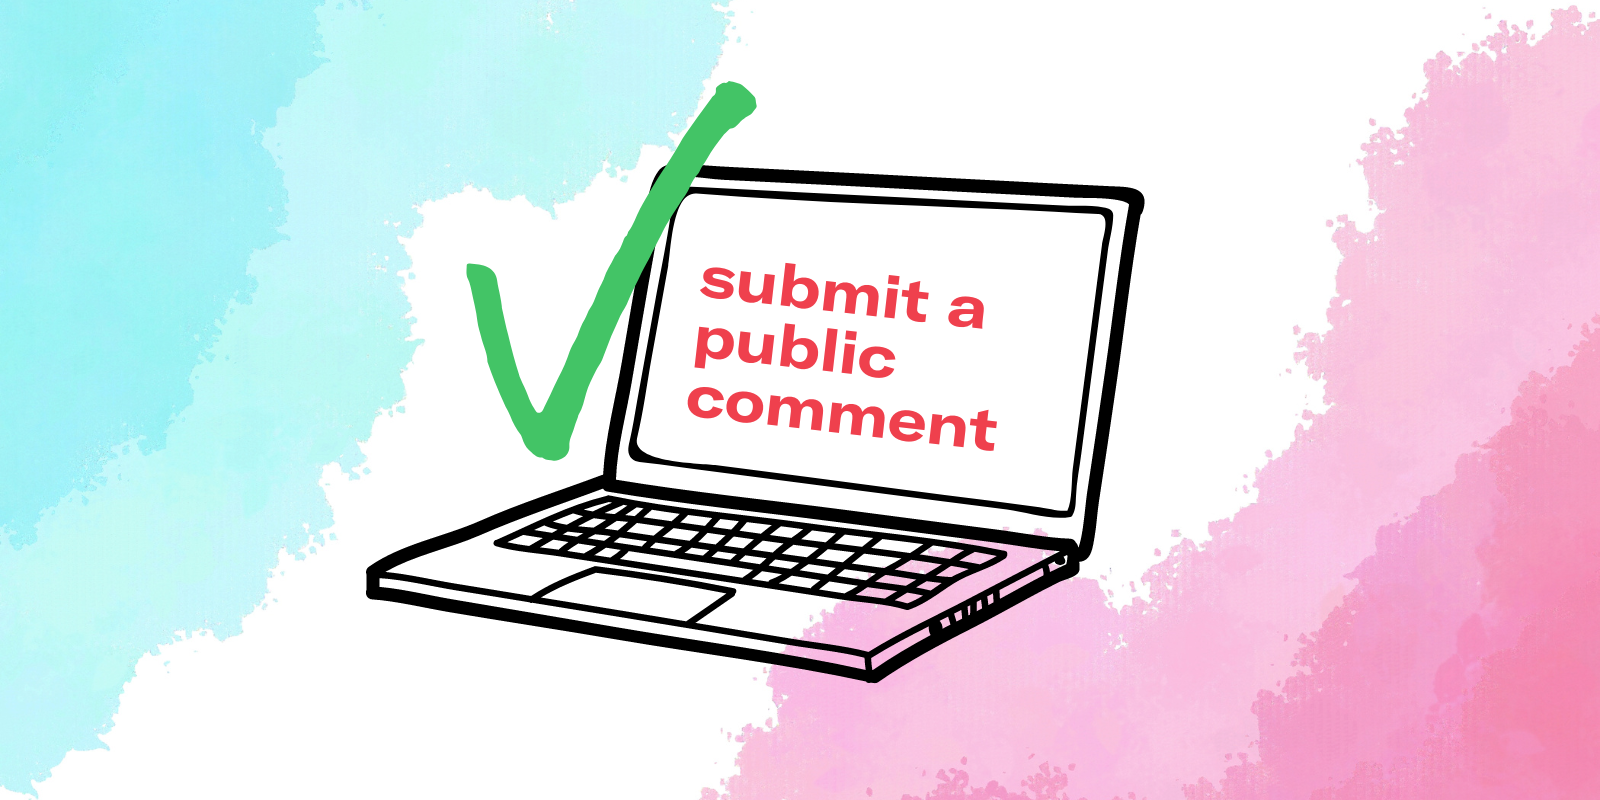 water-colored background of blue, white, pink with a laptop illustration & the text "submit a public comment"